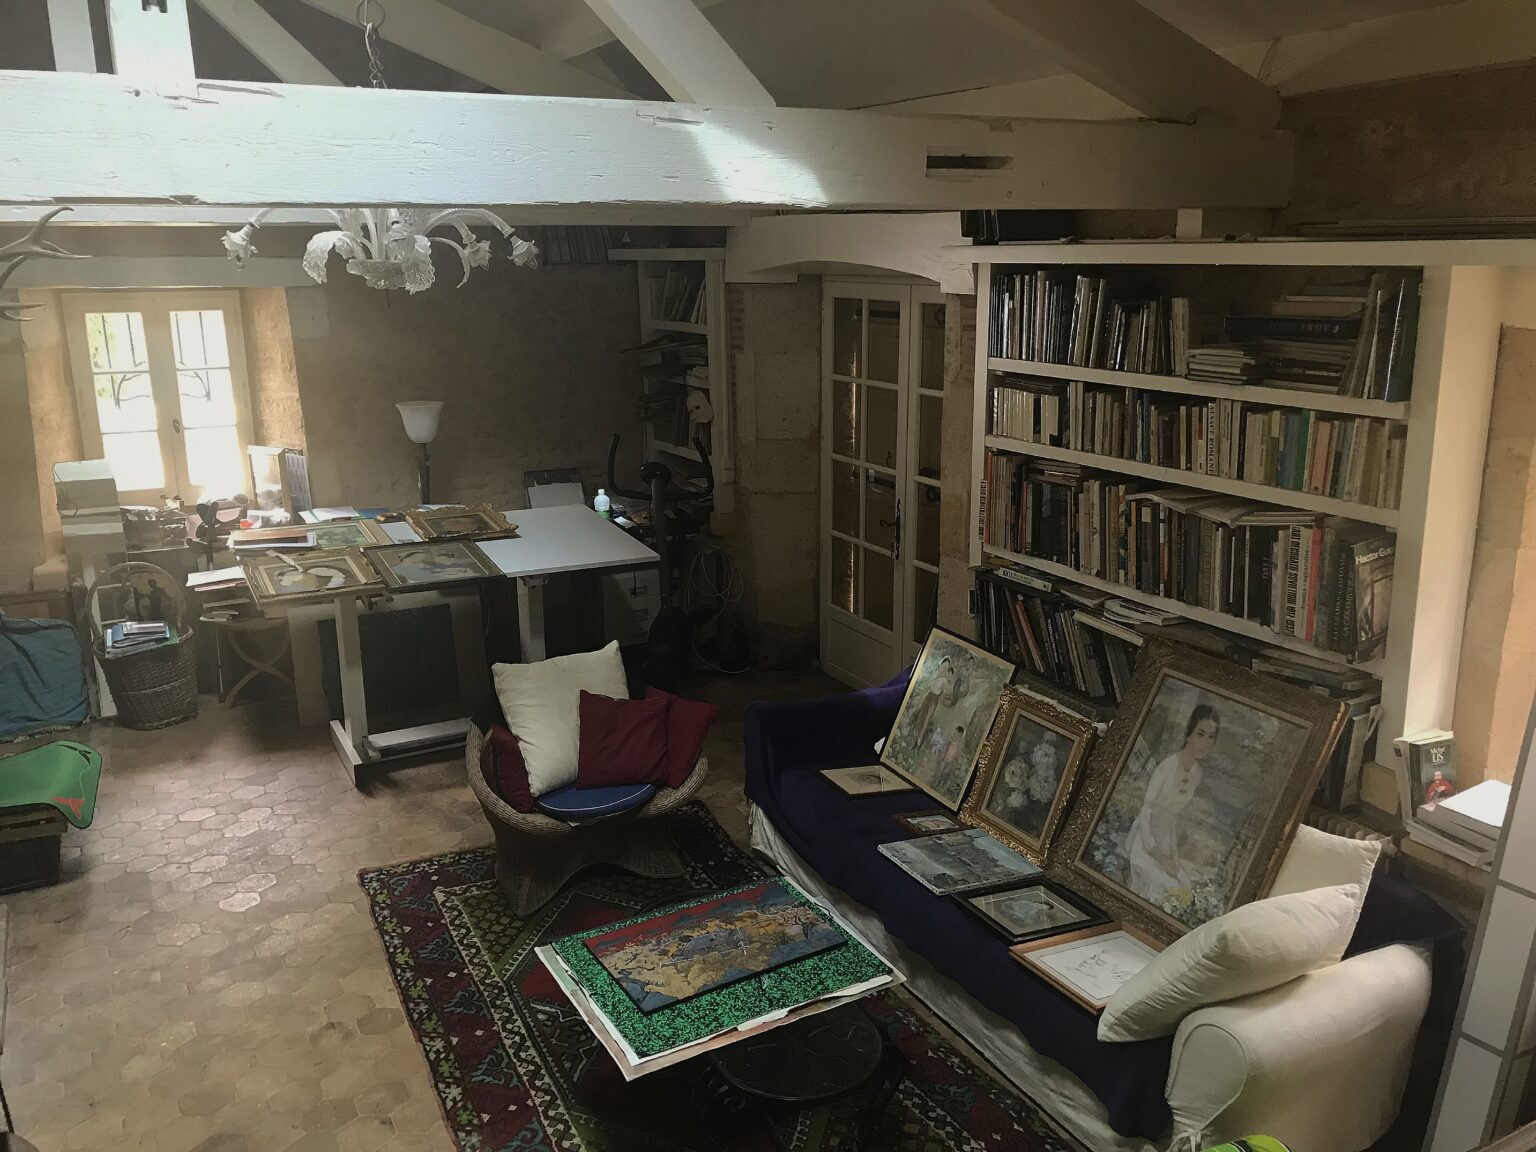 Inside the home of Ngo Manh Duc (B. 1941), son of Le Thi Luu (Vietnamese, 1911-1988) and his art collection.